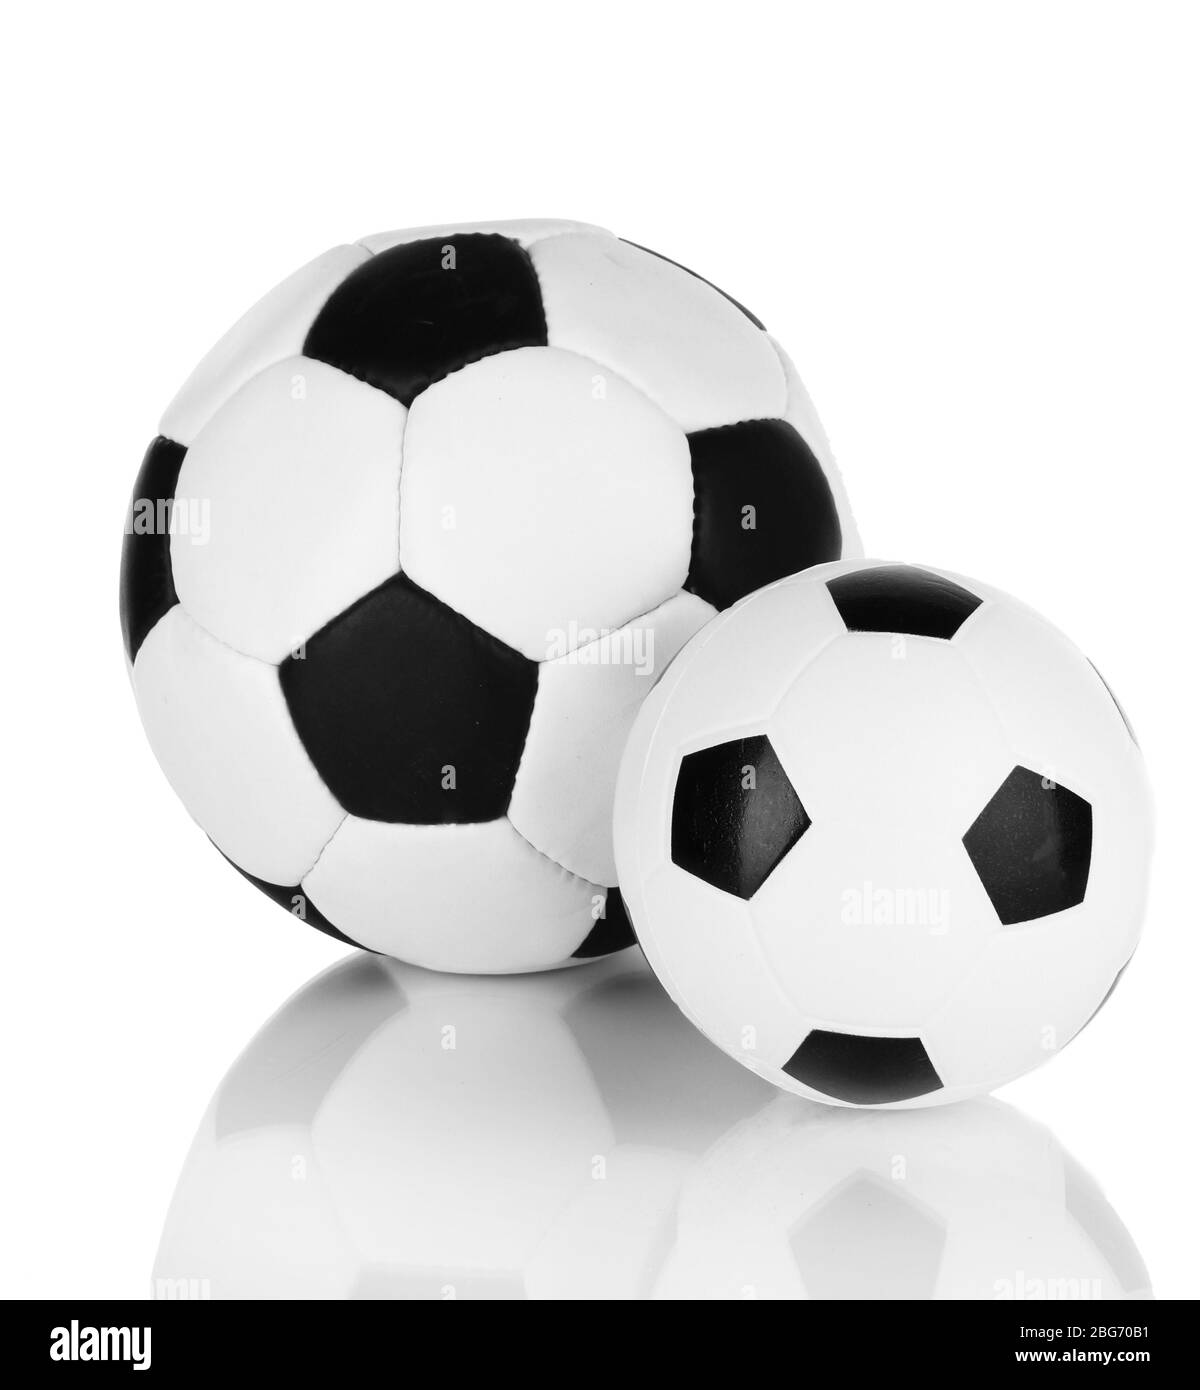 Soccer balls isolated on white Banque D'Images